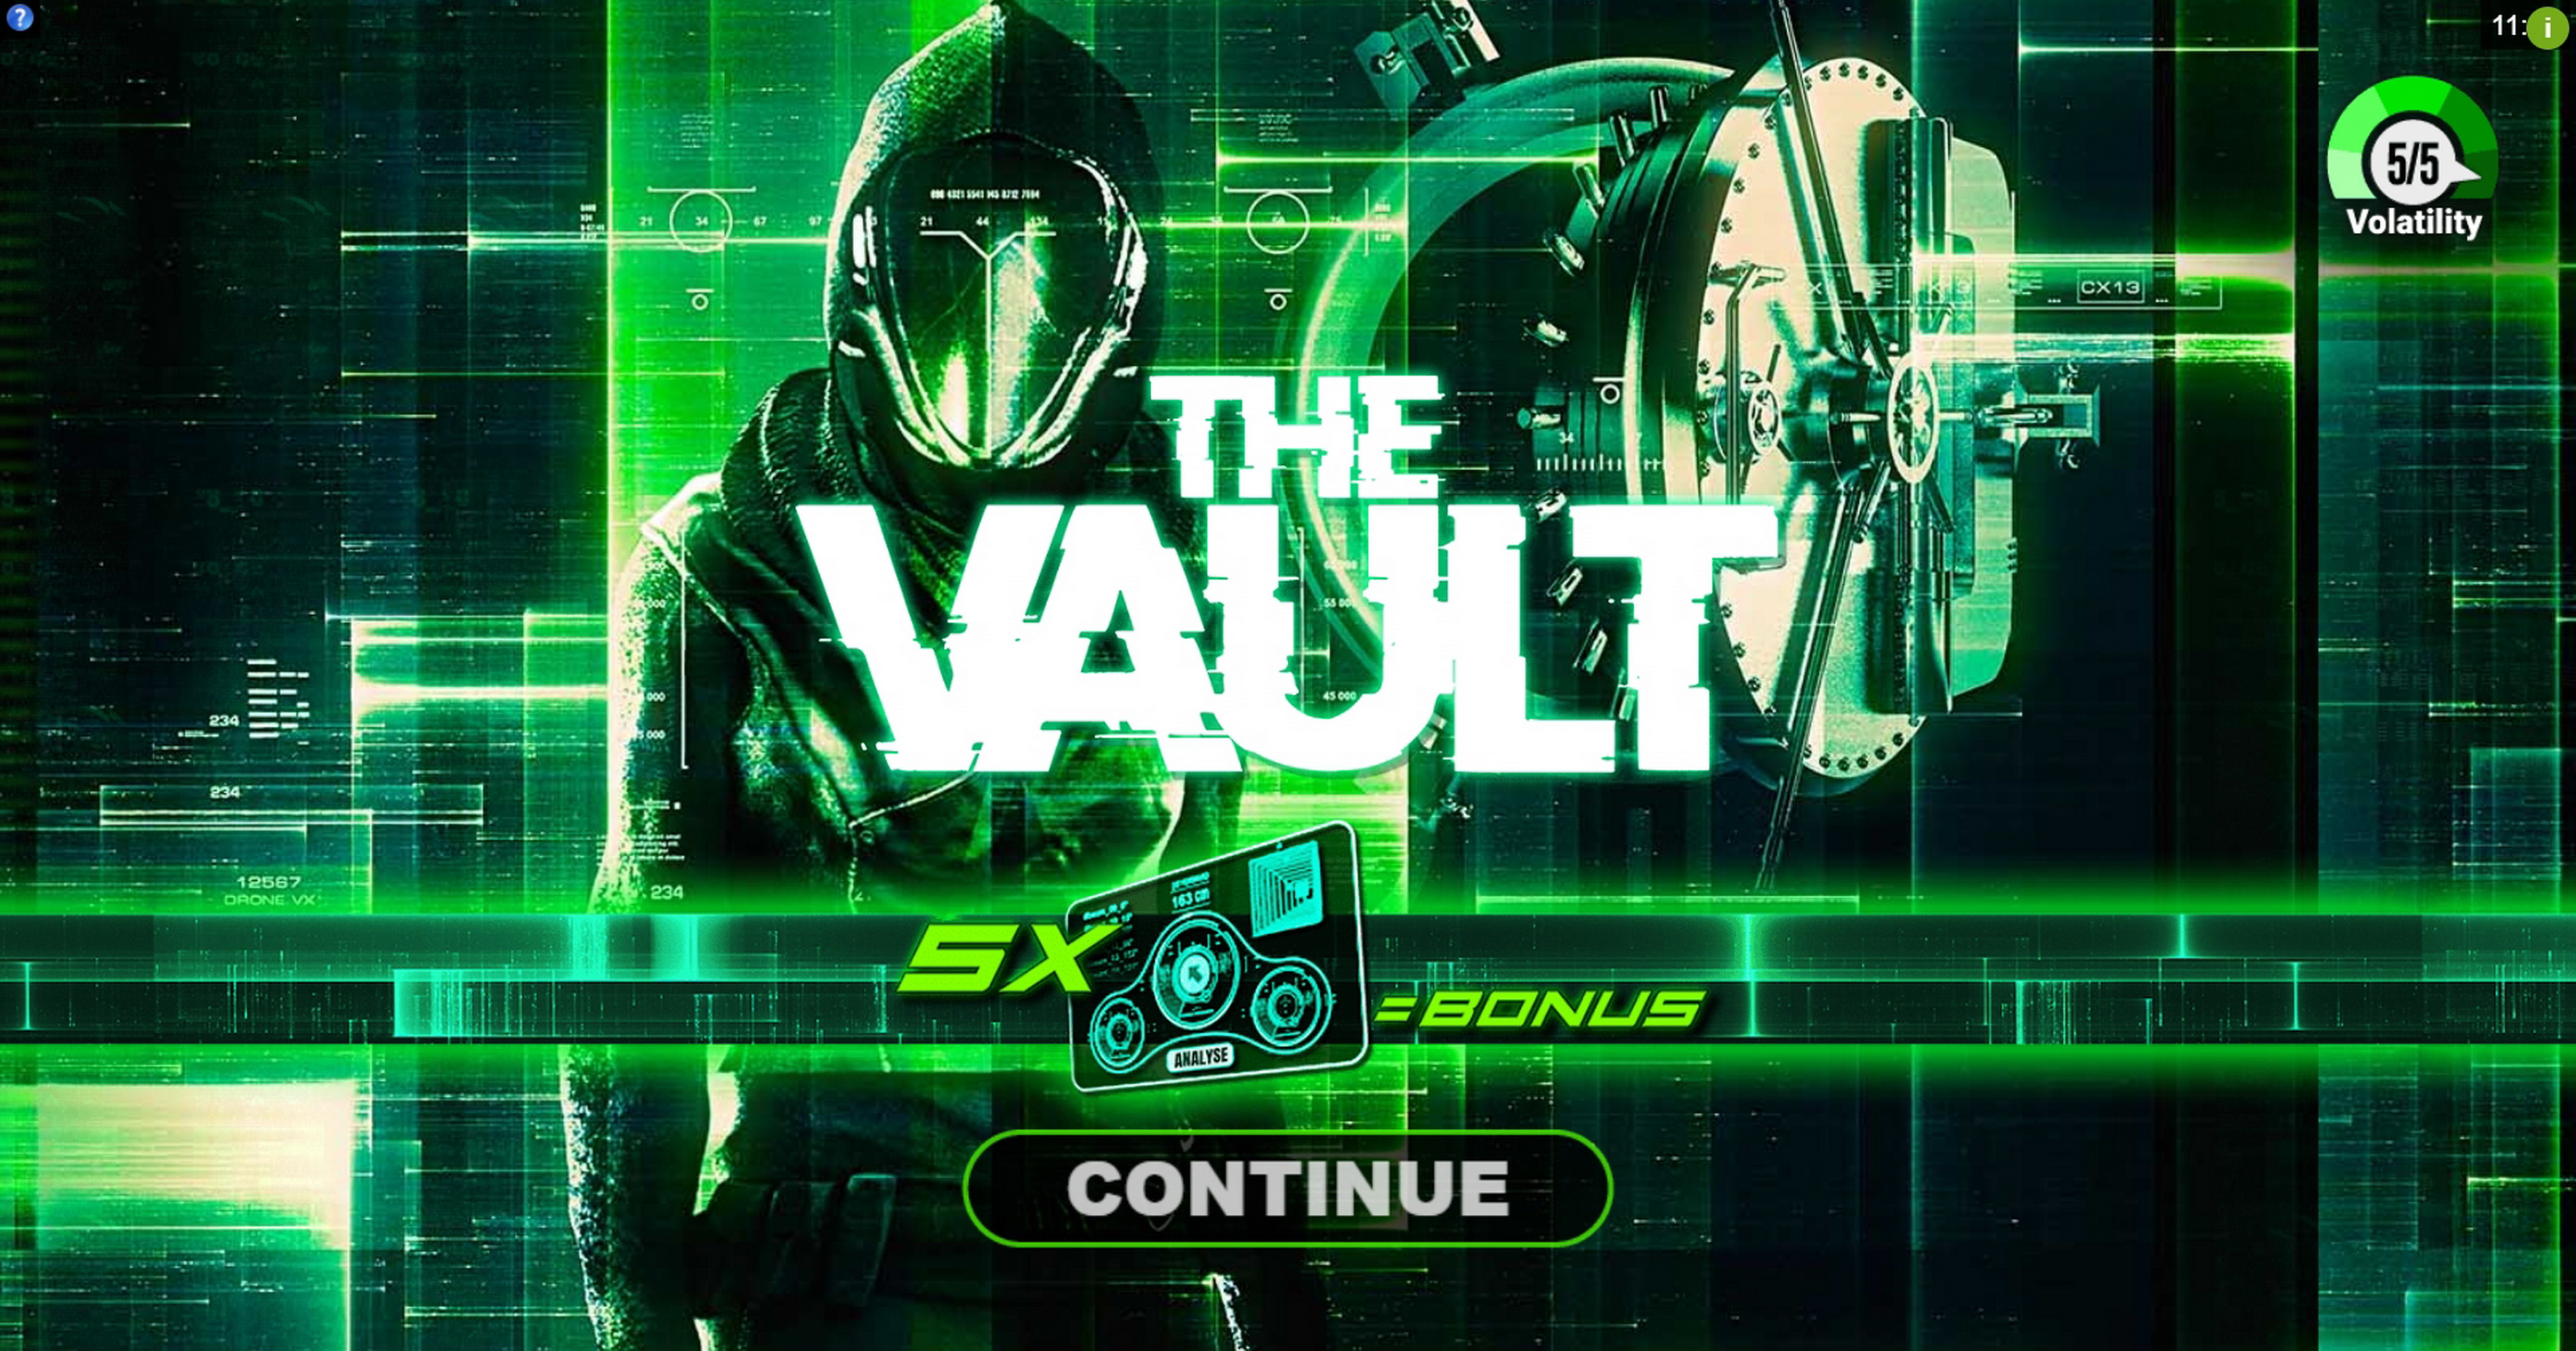 Play The Vault Free Casino Slot Game by Snowborn Games